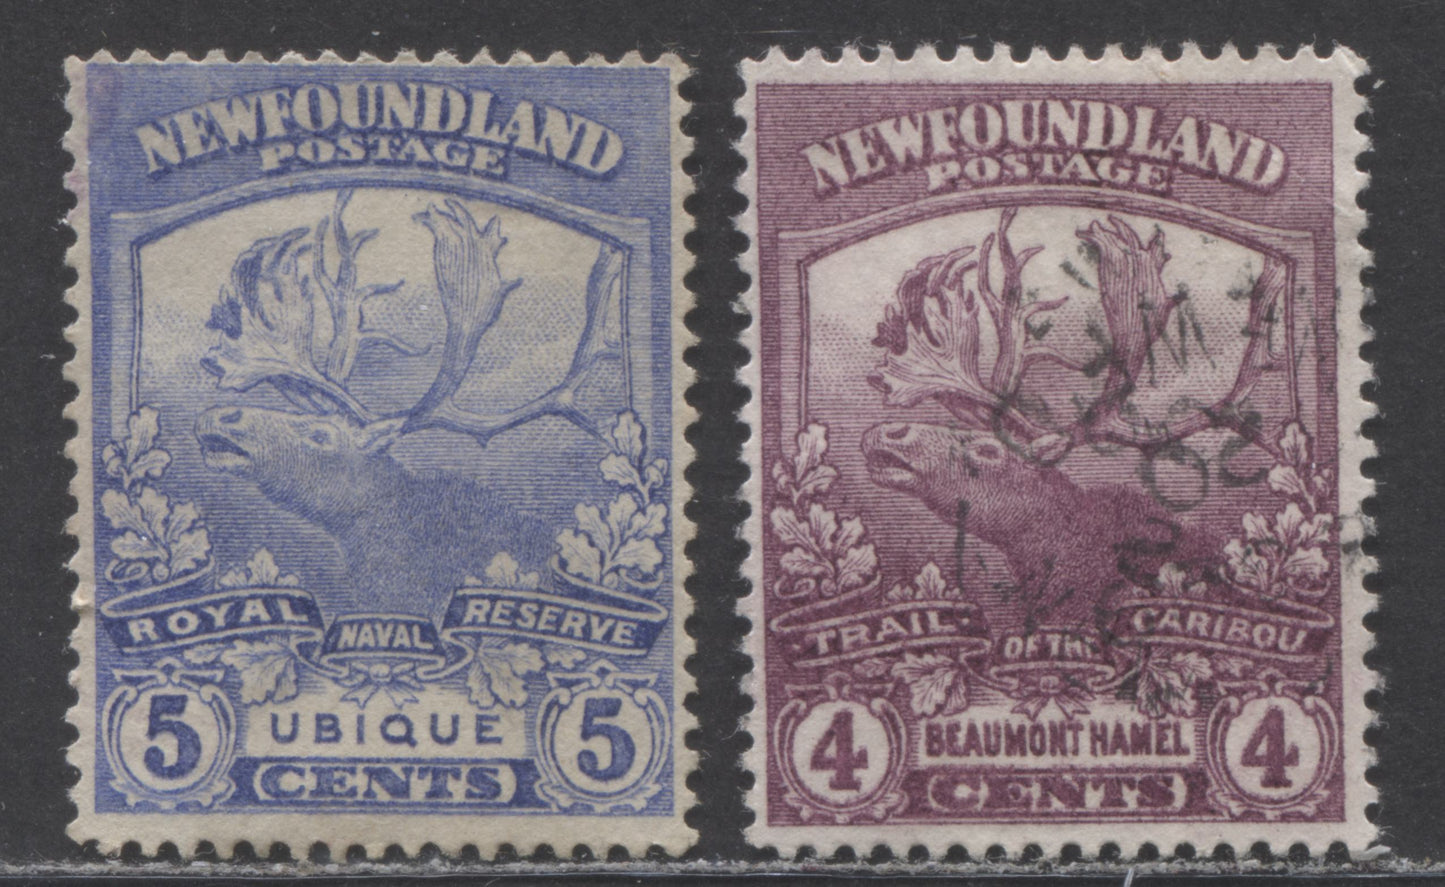 Lot 89 Newfoundland #118b, 119 4c, 5c Mauve, Ultramarine Beaumont Hamel, Ubique, 1919 Trail Of The Caribou Issue, 2 F-VF Used Singles With Kiss Print, Extensive Doubling